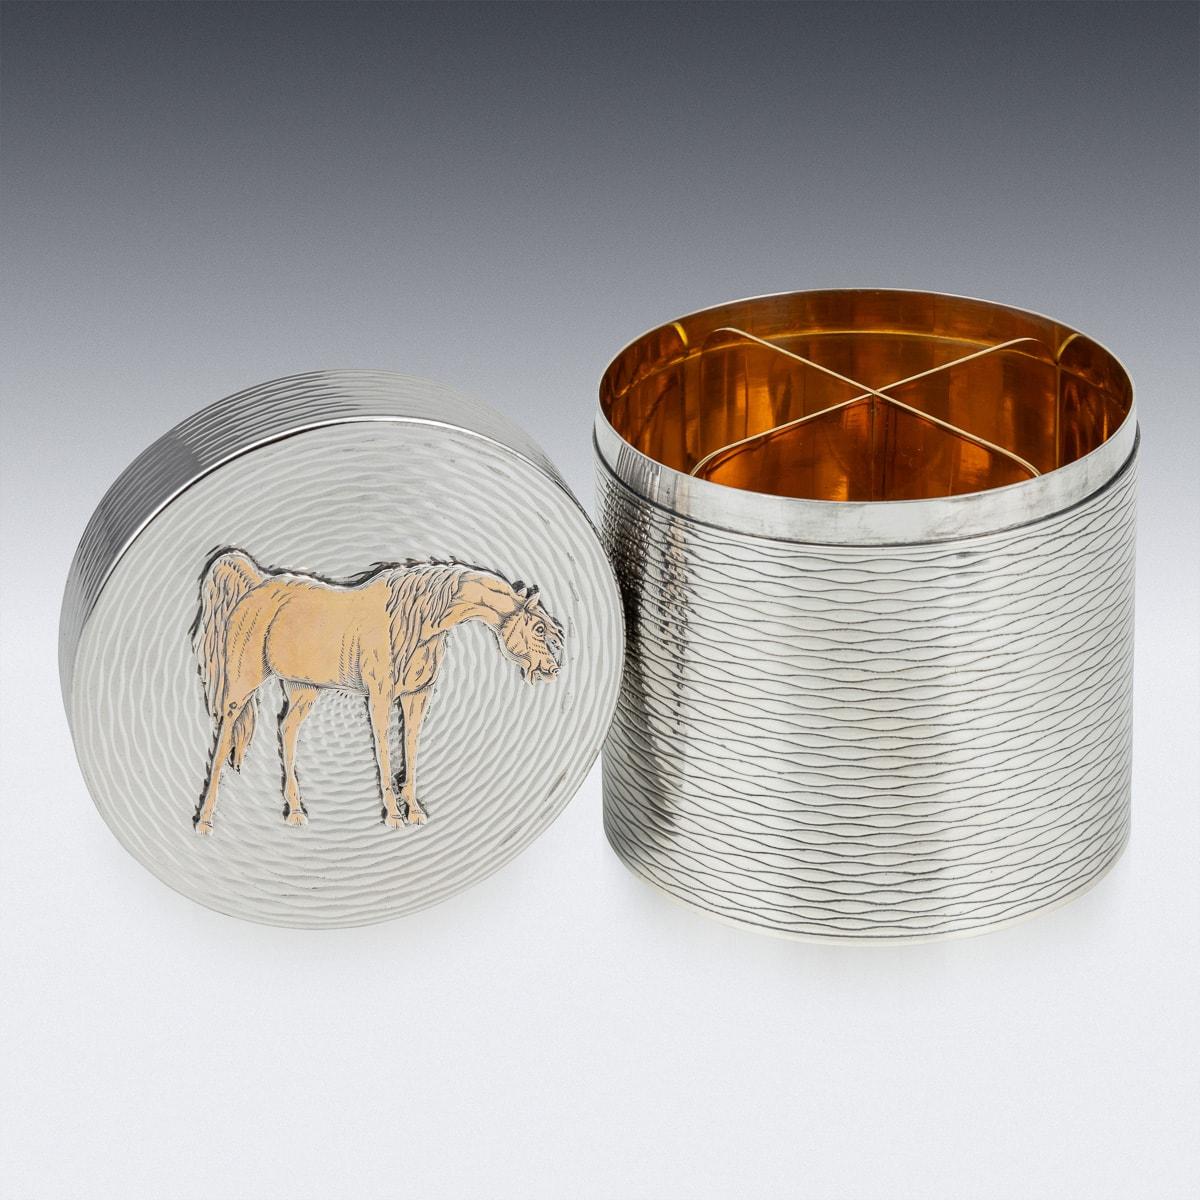 Mid-20th Century Hermes Solid Silver Cigarette Box & Matchbox With Gold Horse Detail c.1960 For Sale